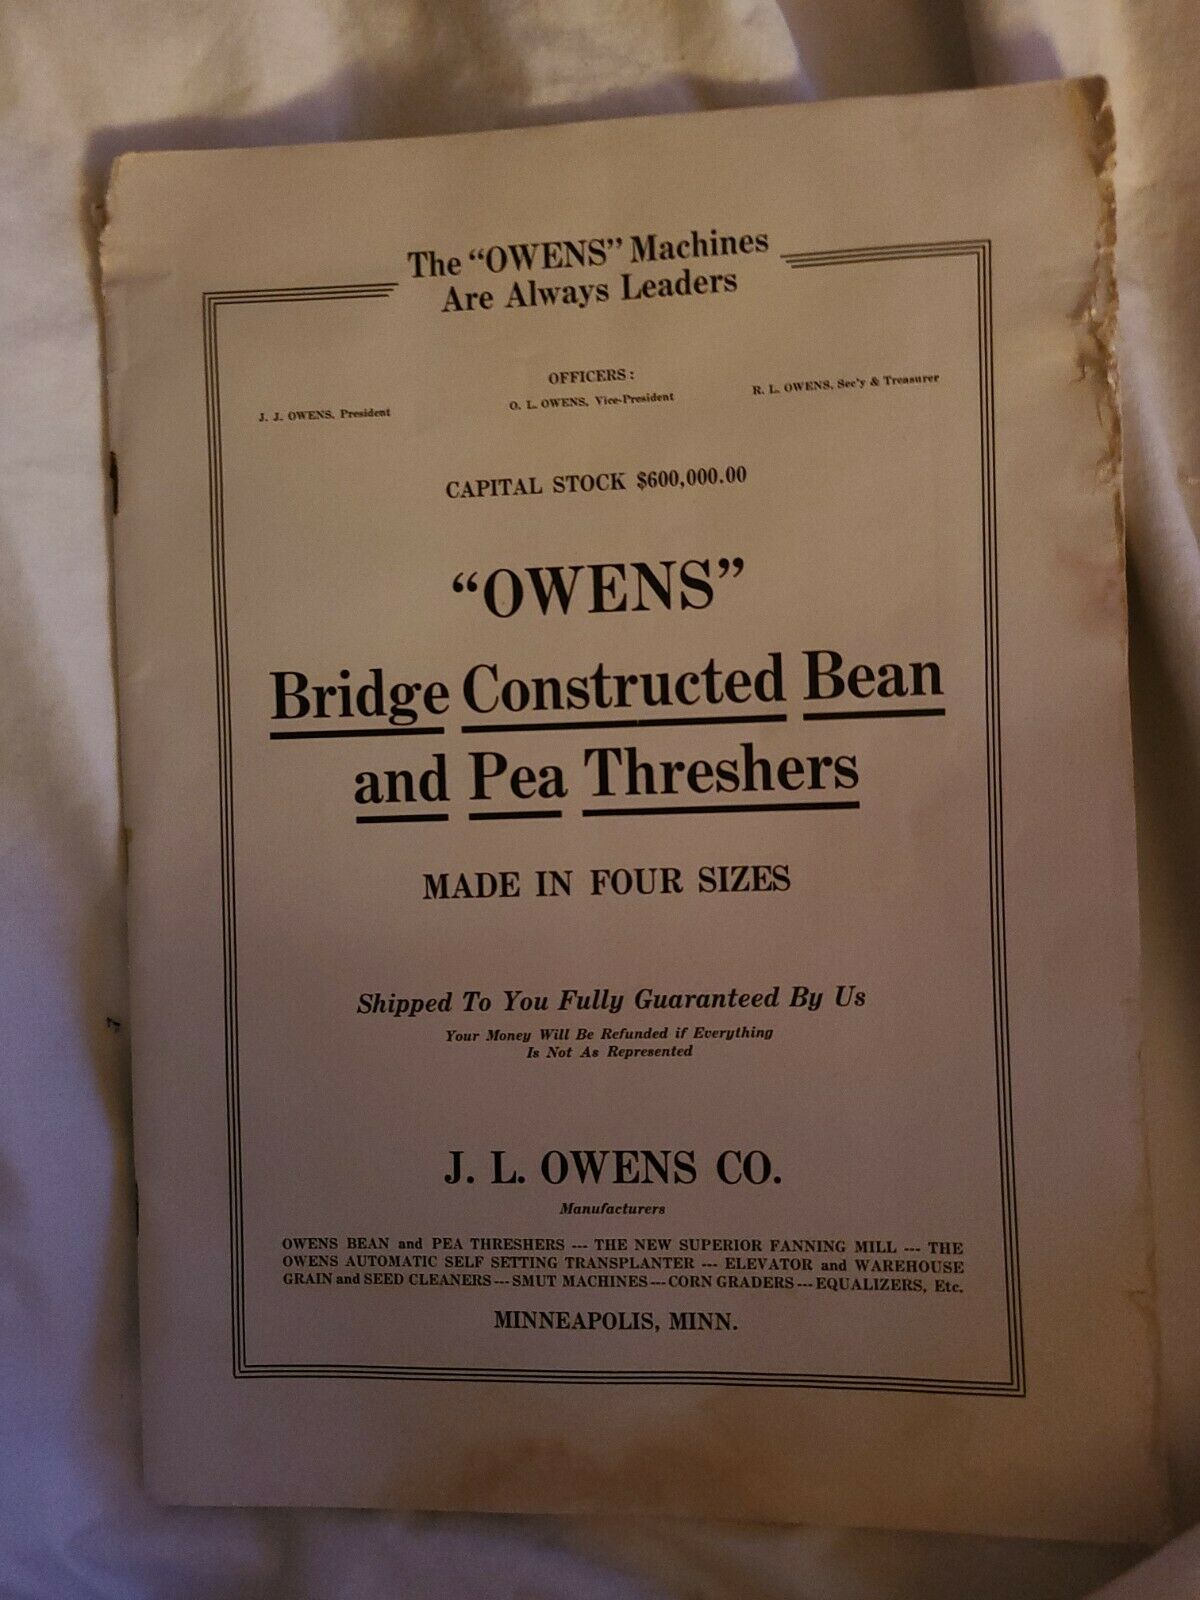 Vintage 1915 "owens" Bridge Constructed Bean And Pea Threshers Information Guide